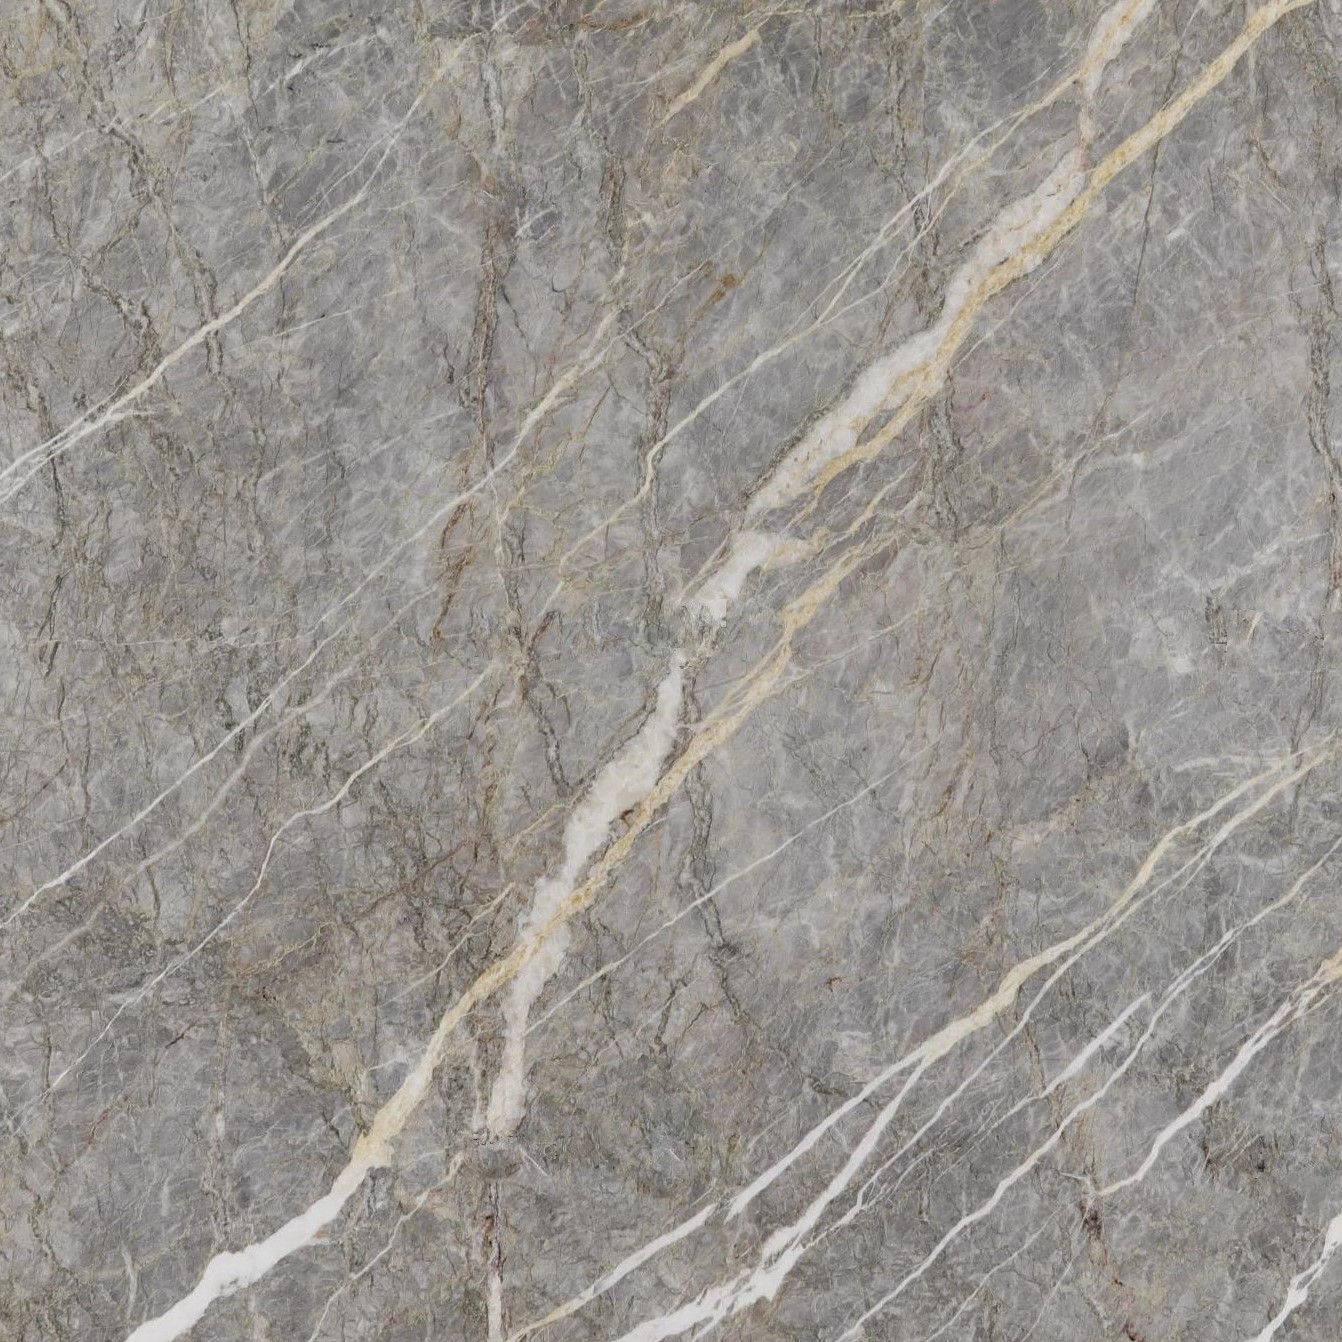 Fior Di Pesco Marble - Marble Tiles & Pavers - Sydney Tile Gallery